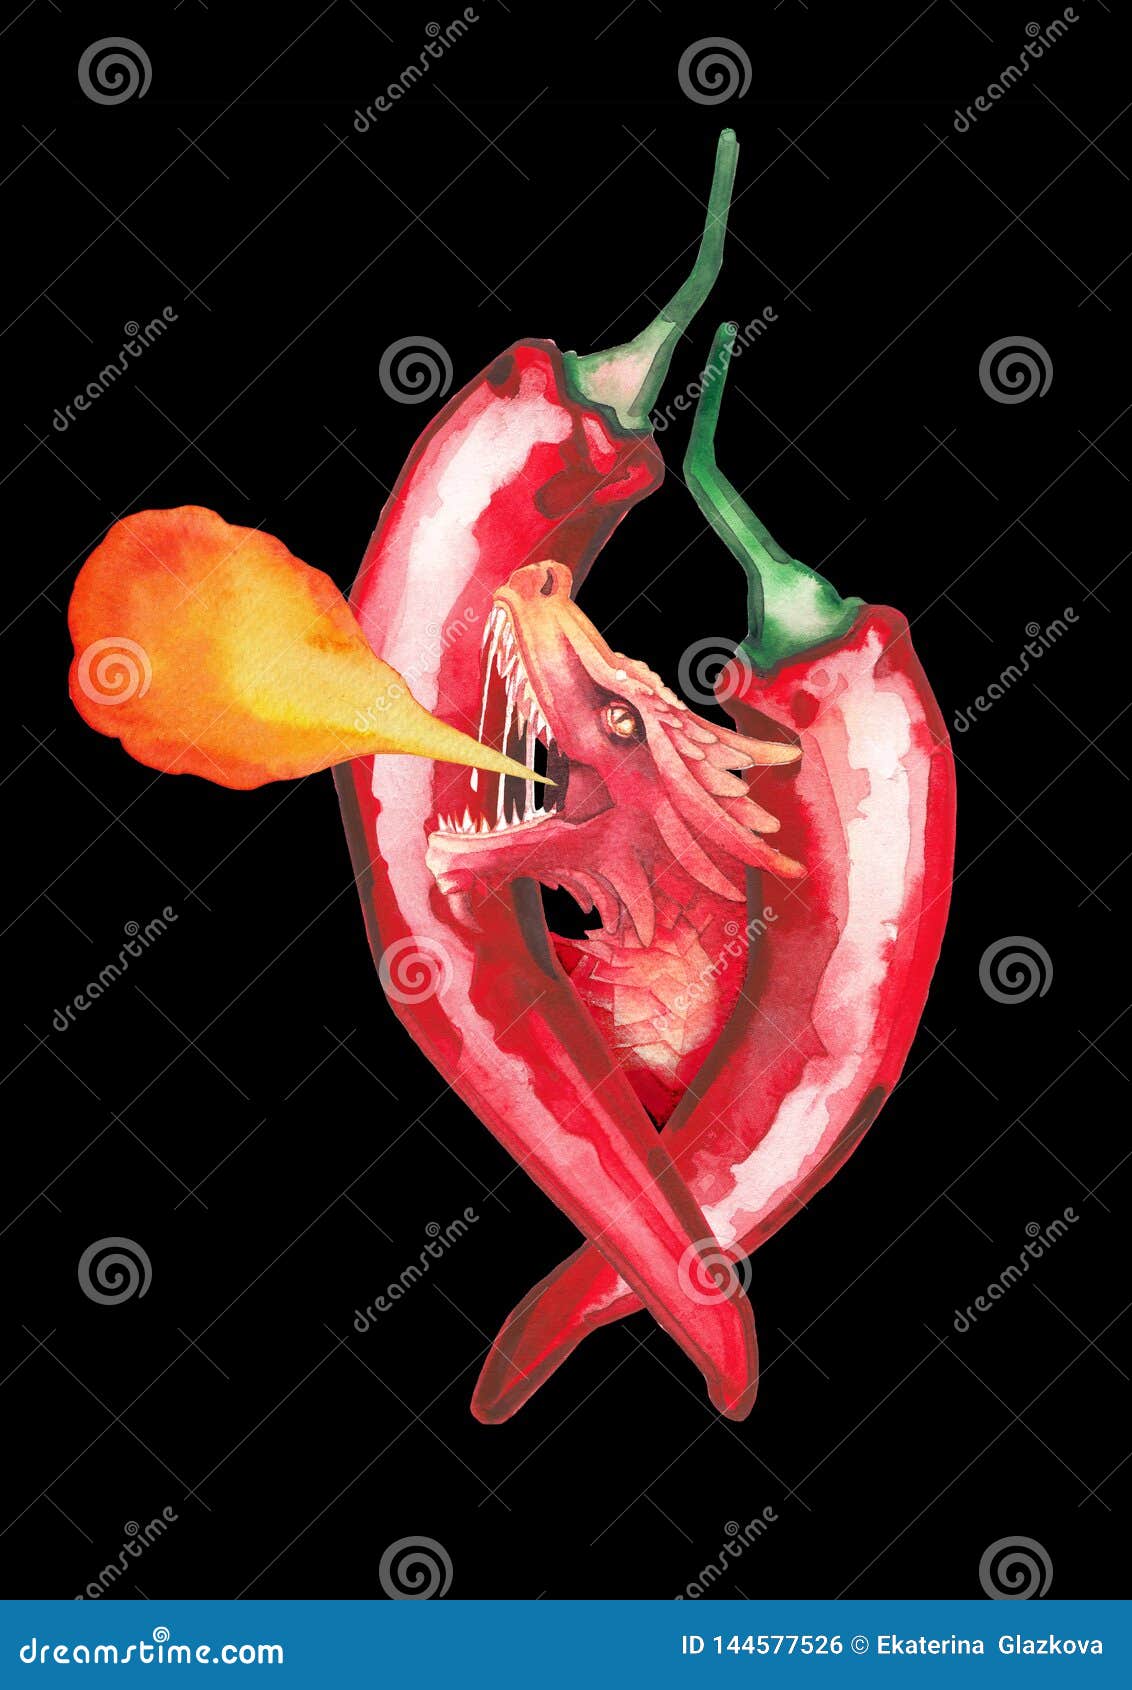 147 Dragon Peppers Photos Free Royalty Free Stock Photos From Dreamstime